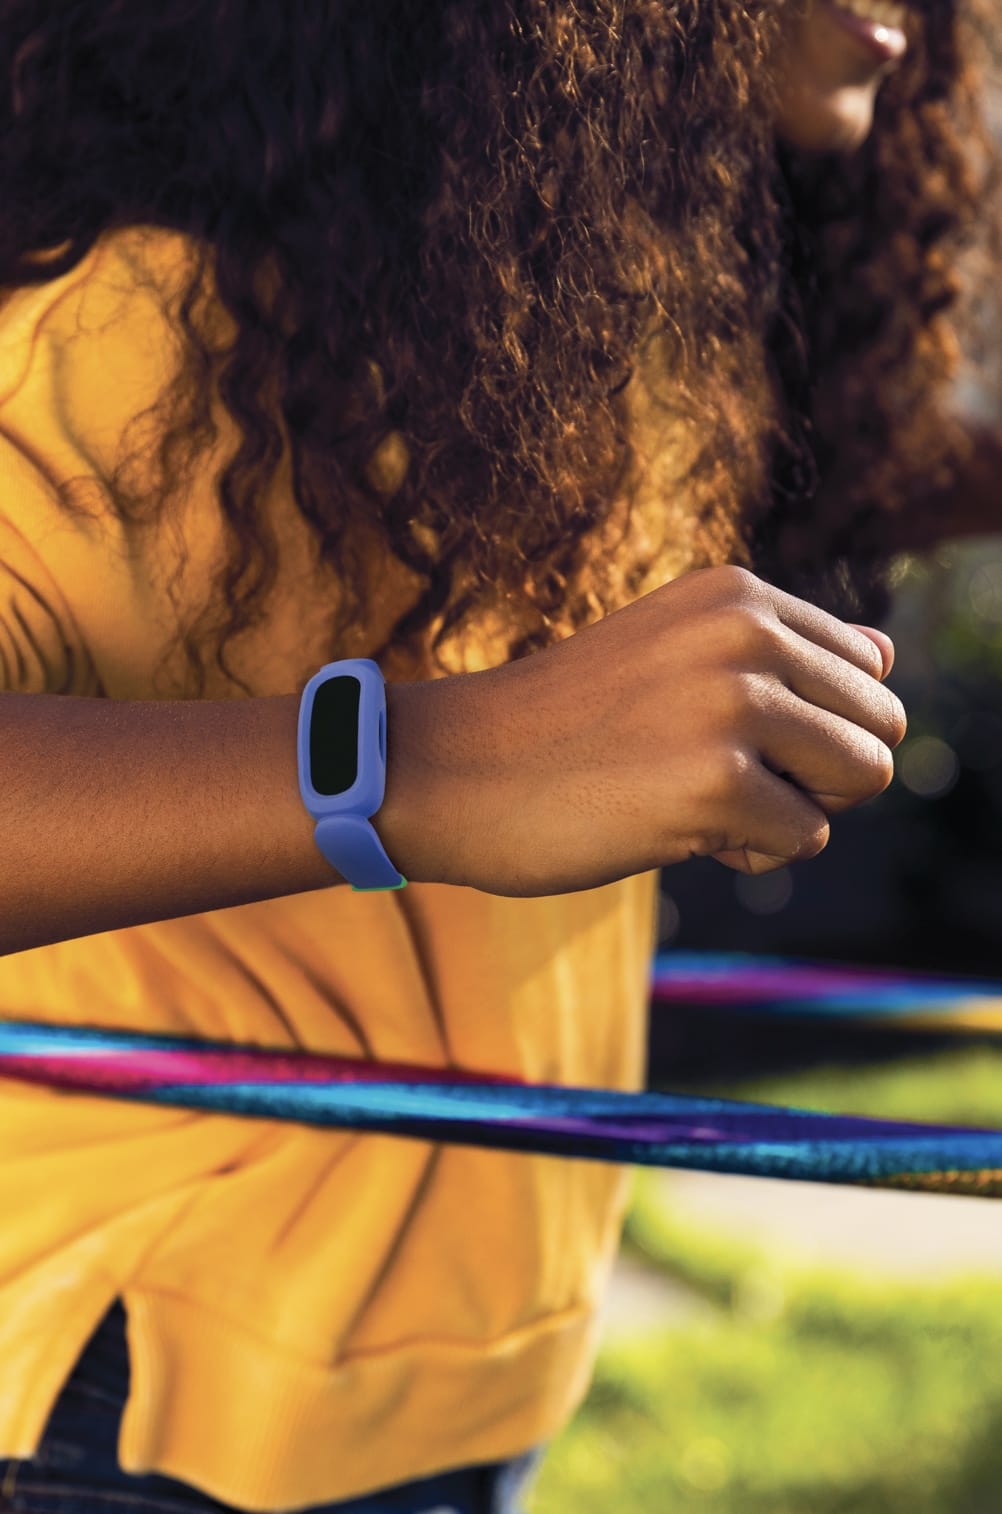 Bands Compatible With Fitbit Ace 3 For Kids Soft Tpe - Temu